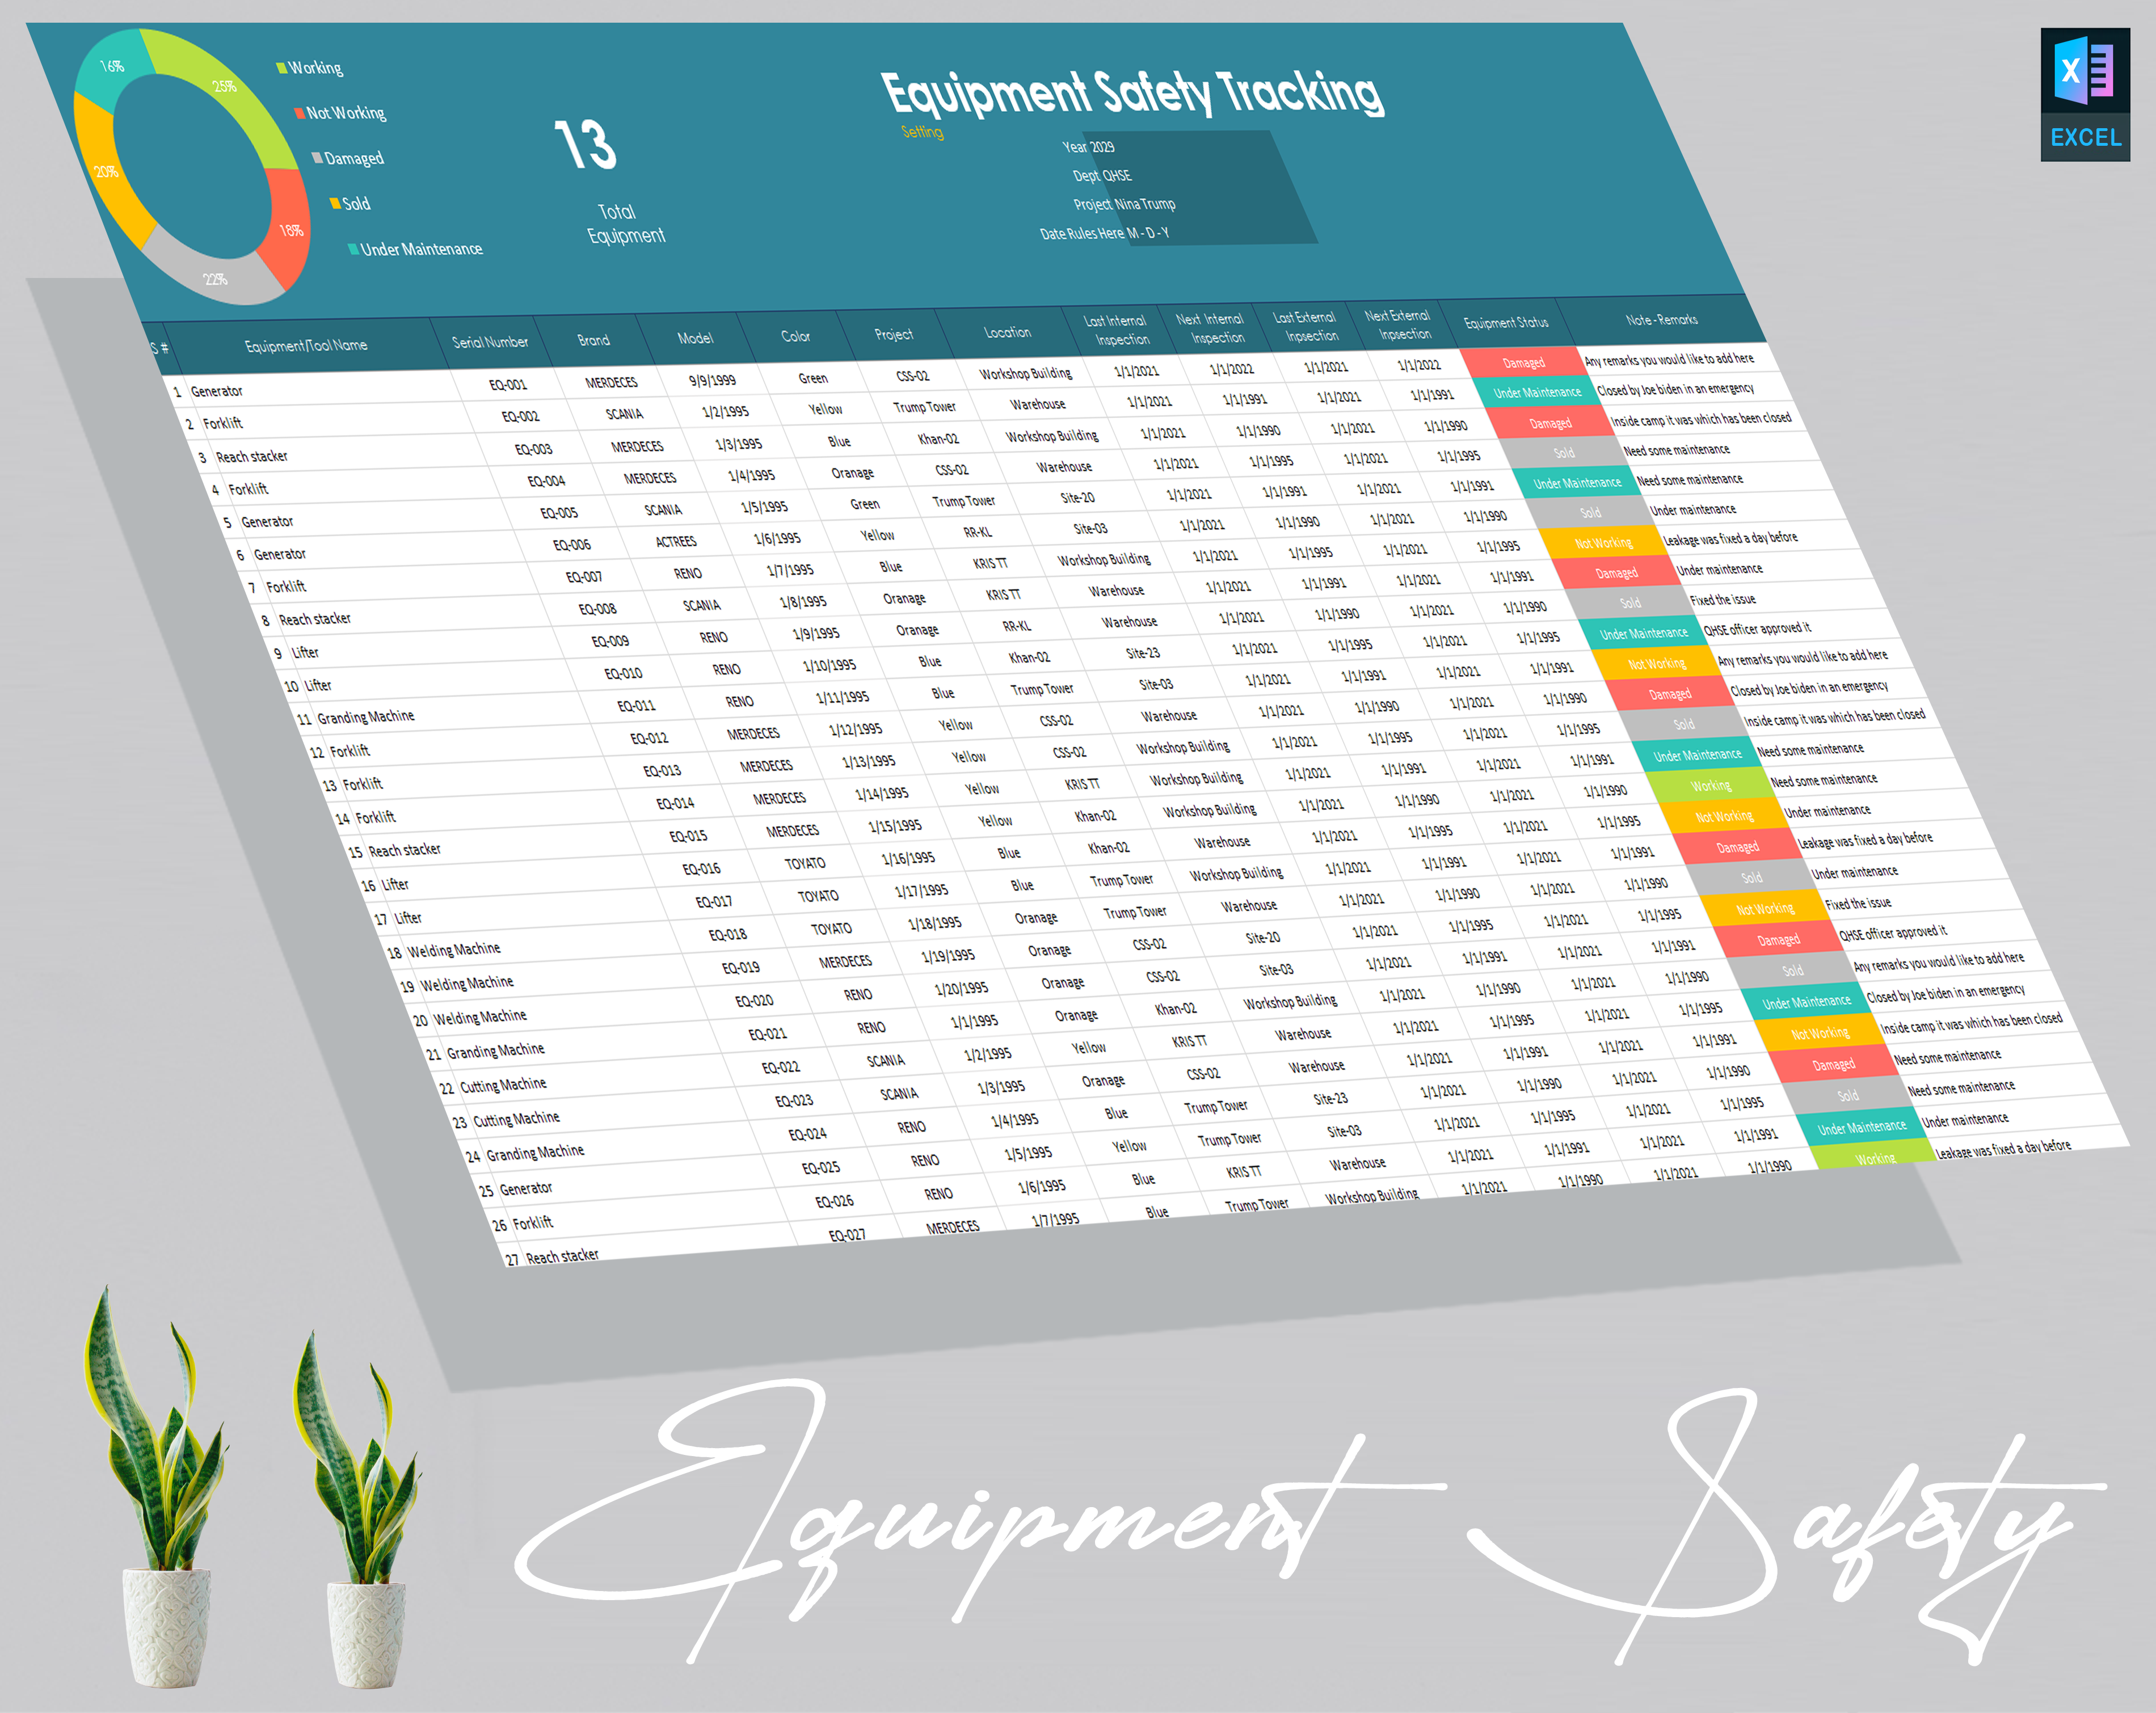 Equipment Safety Tracking Matrix Template